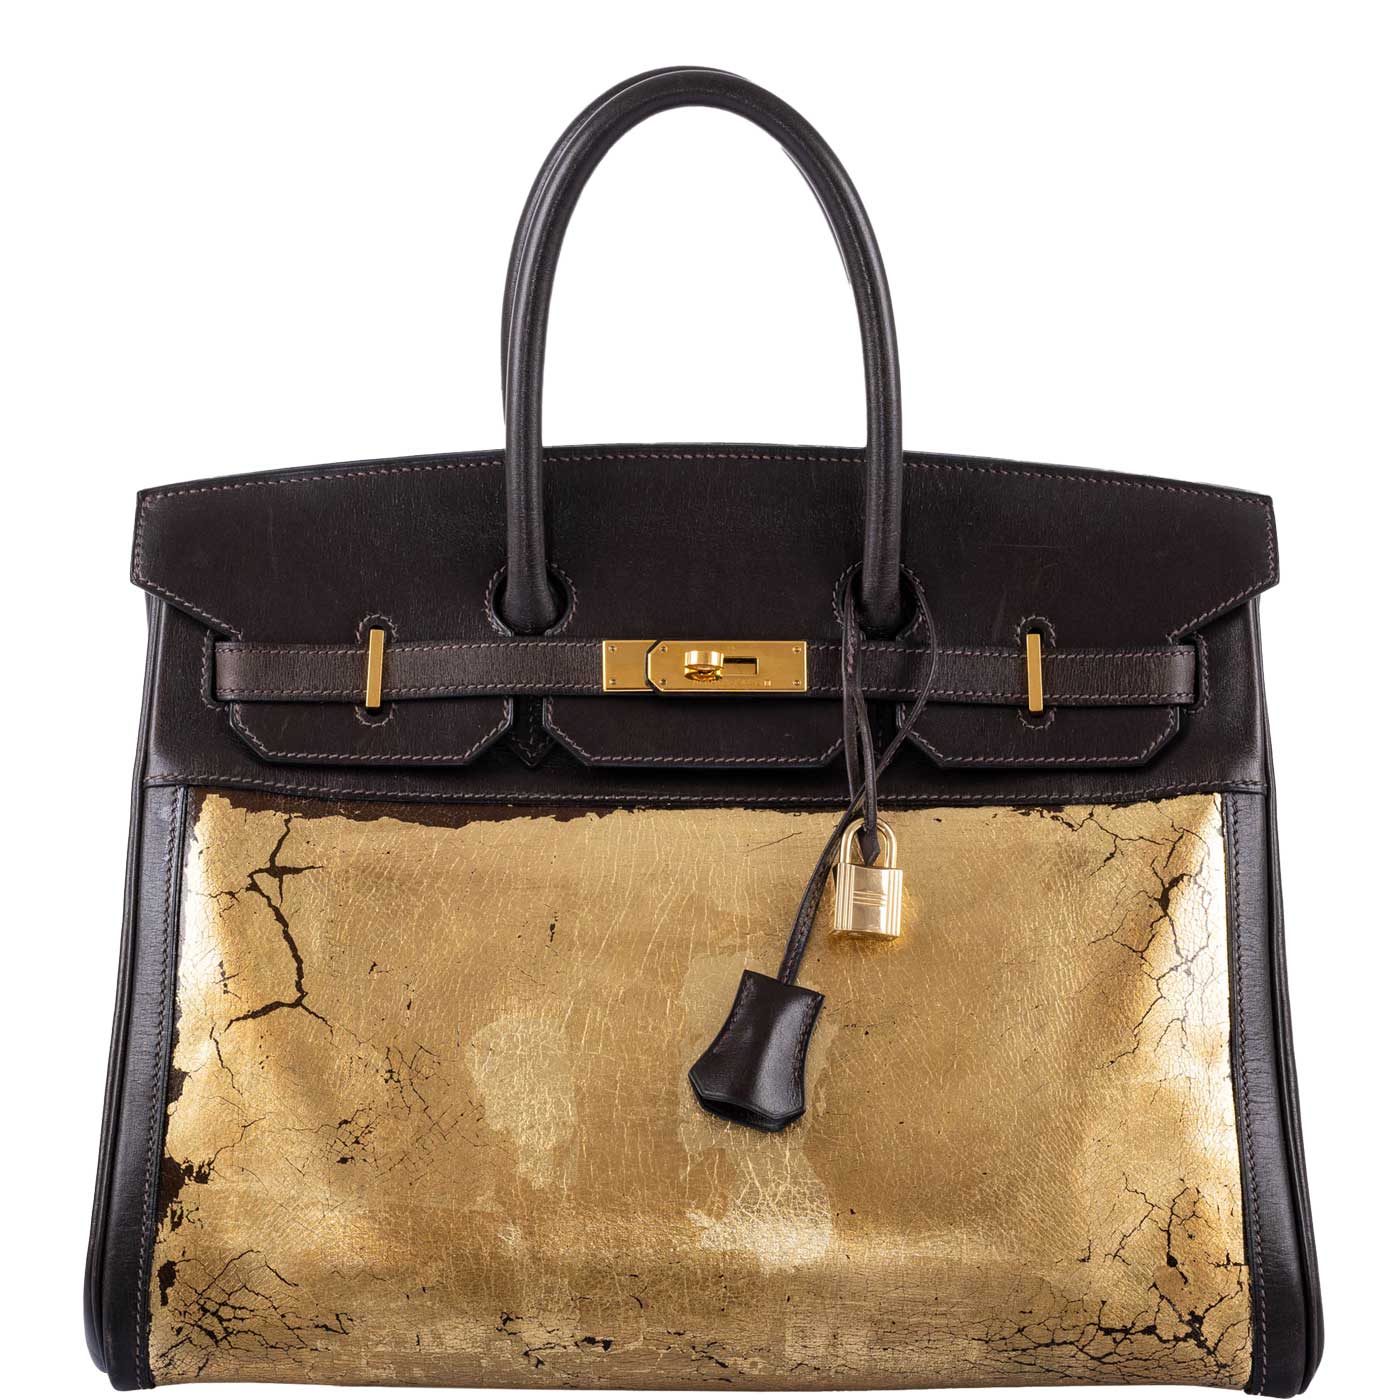 HERMES BIRKIN BOX LEATHER 25, 30, 35, 40 BLACK, GOLD AND More